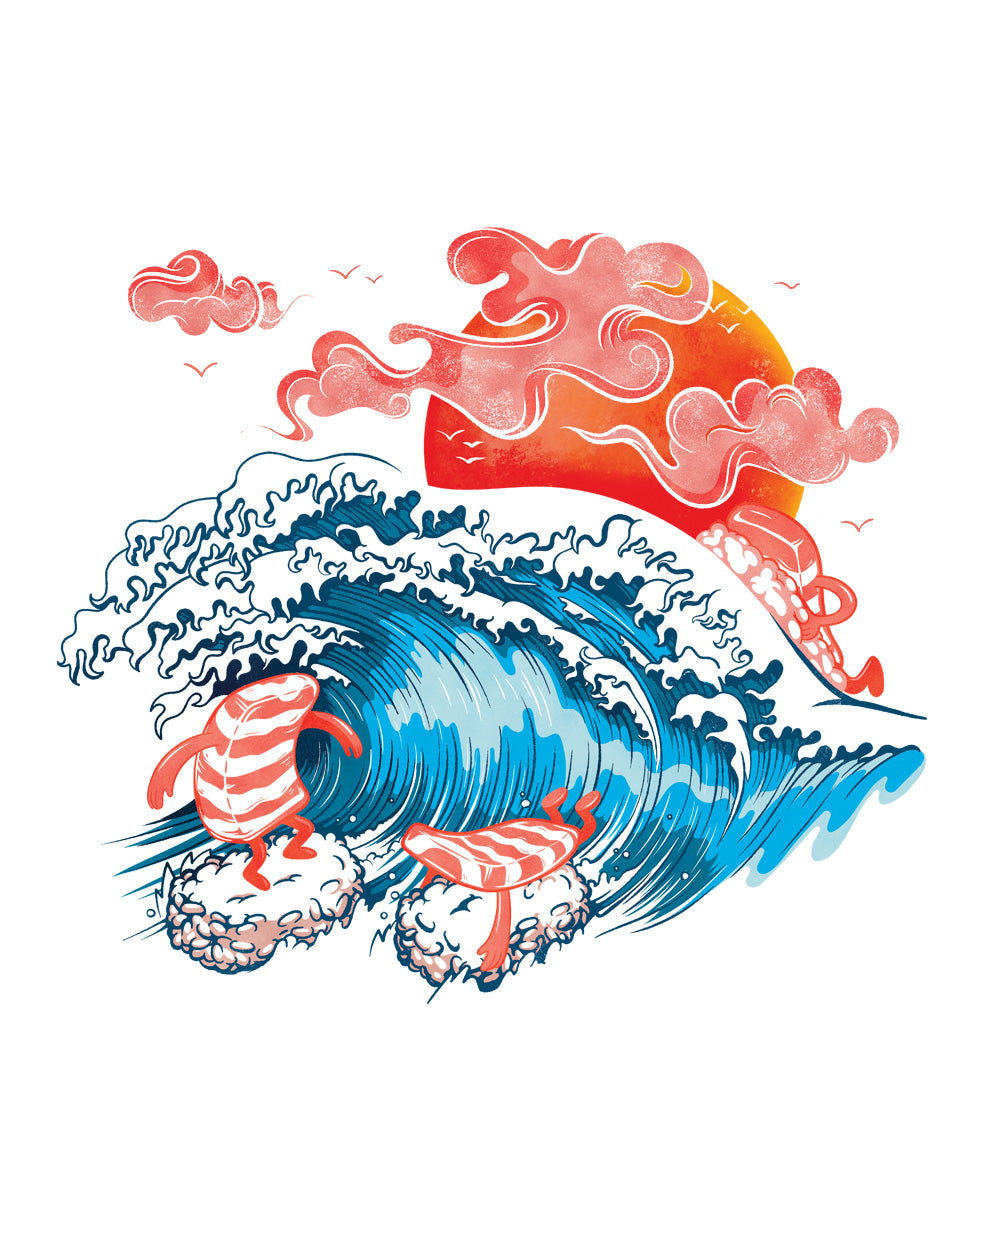 Sushi Surf Japanese Japan Salmon Nori Food Foodie Cute Artsy Surfing Great Wave Cotton T-Shirt